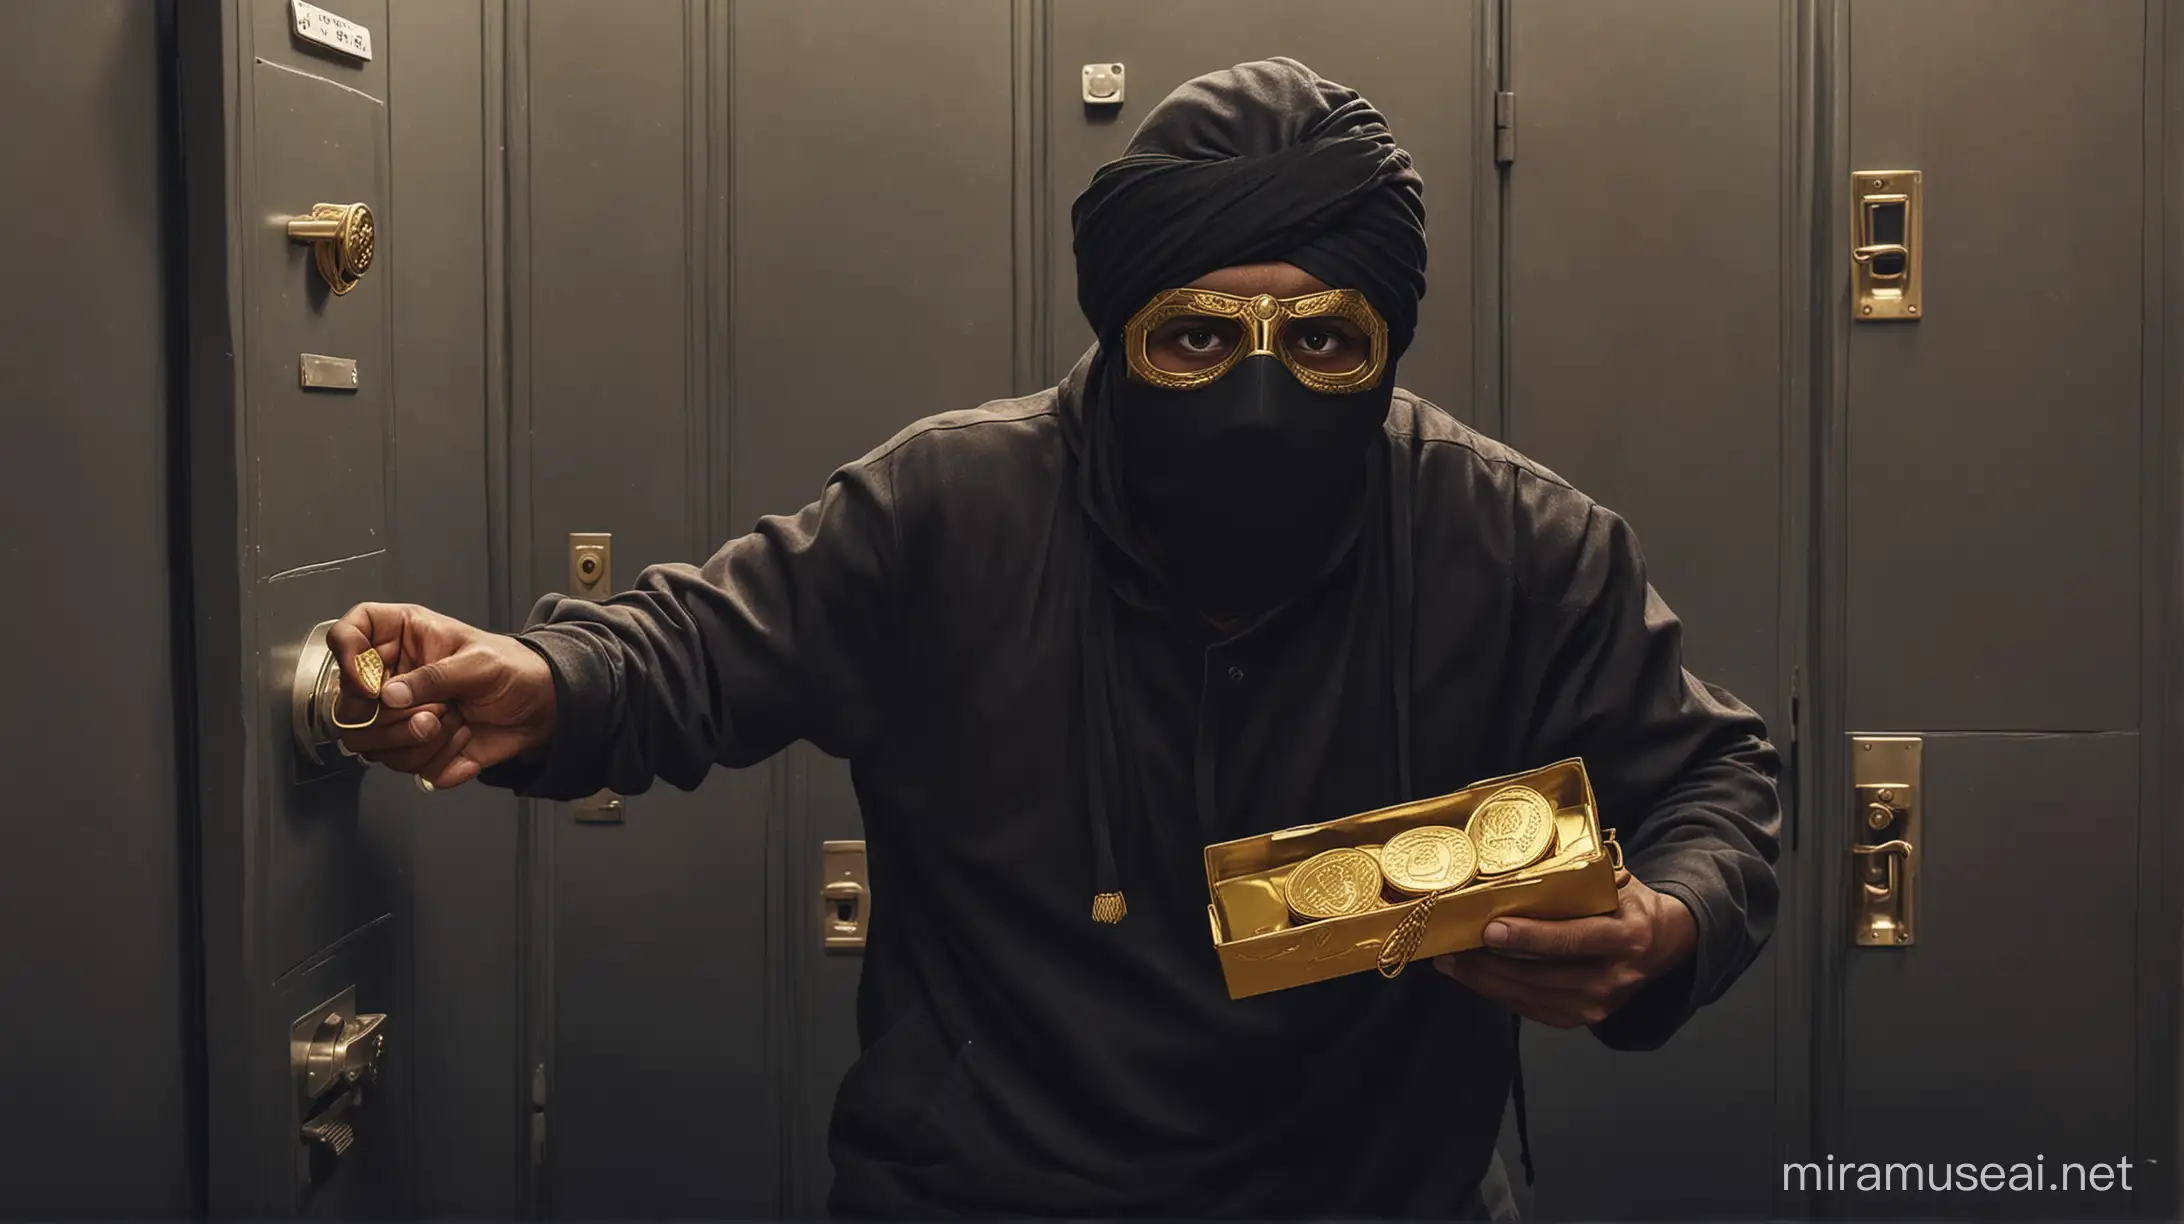 Generate an image depicting a clever Indian thief stealthily stealing 100 grams gold from a bank locker. Show the thief dressed in dark clothing, wearing a mask